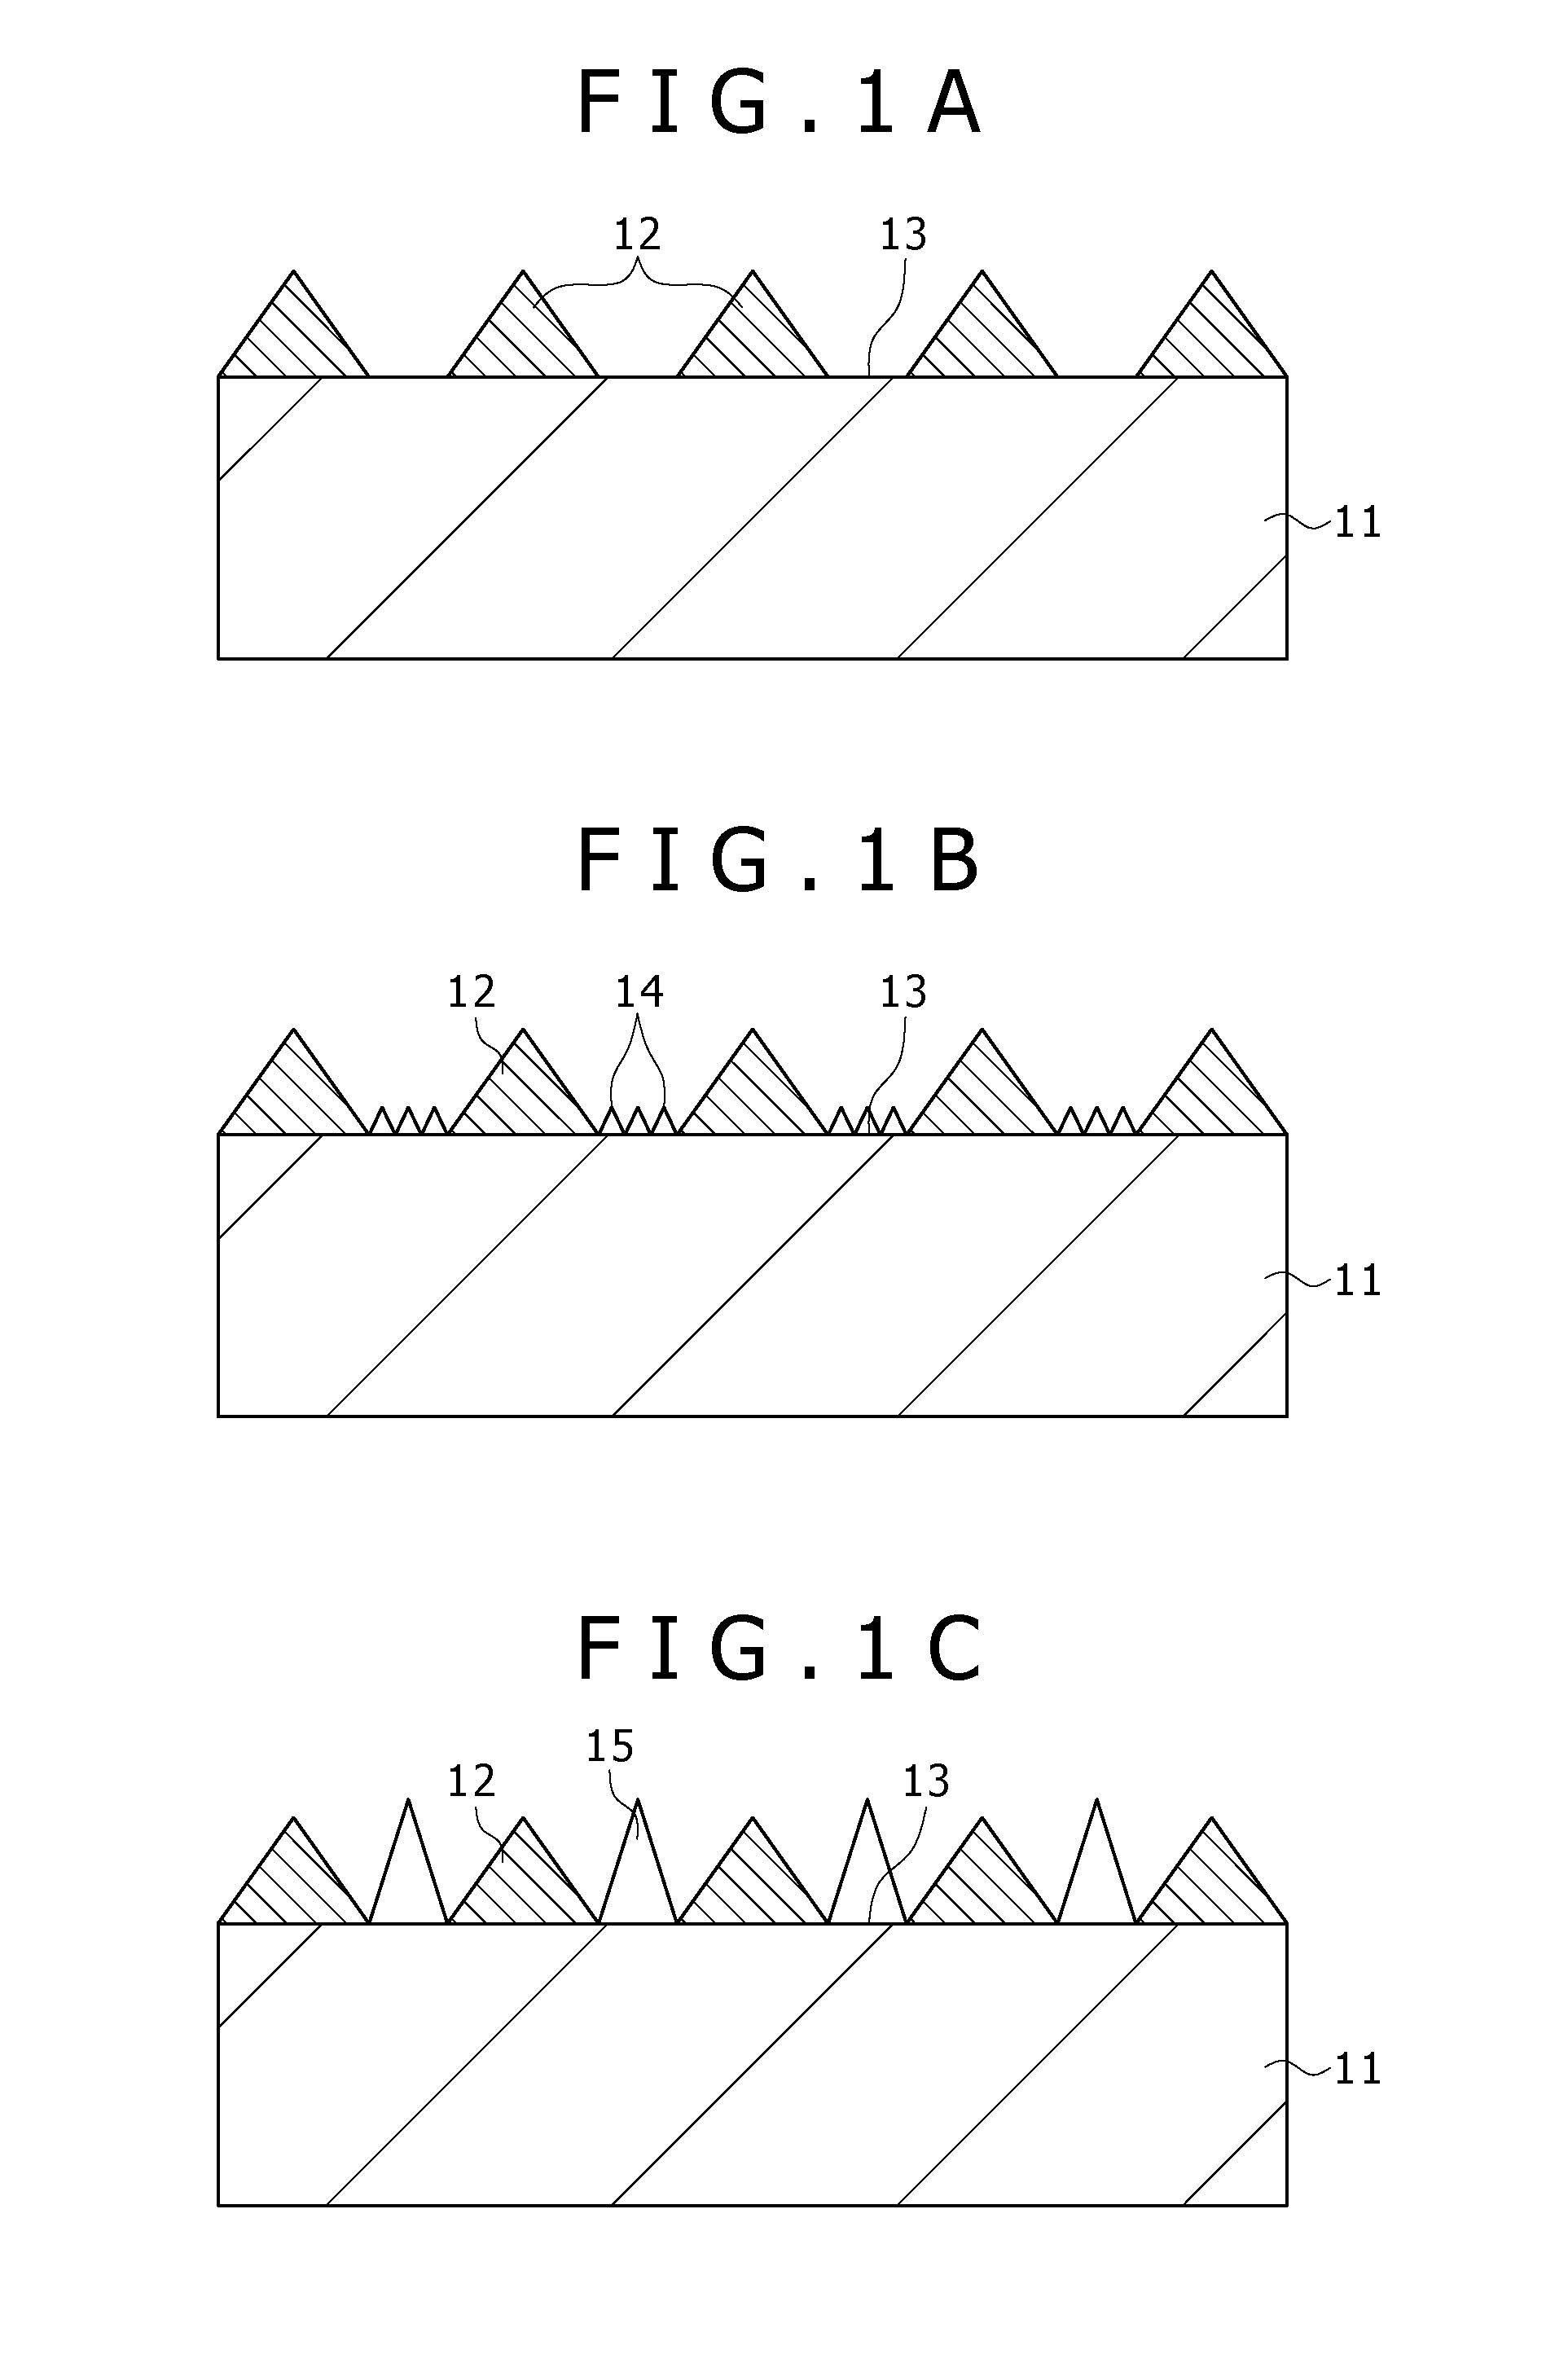 Light-emitting diode and method for manufacturing same, integrated light-emitting diode and method for manufacturing same, method for growing a nitride-based iii-v group compound semiconductor, substrate for growing a nitride-based iii-v group compound semiconductor, light source cell unit, light-emitting diode backlight, light-emitting diode illuminating device, light-emitting diode display and electronic instrument, electronic device and method for manufacturing same